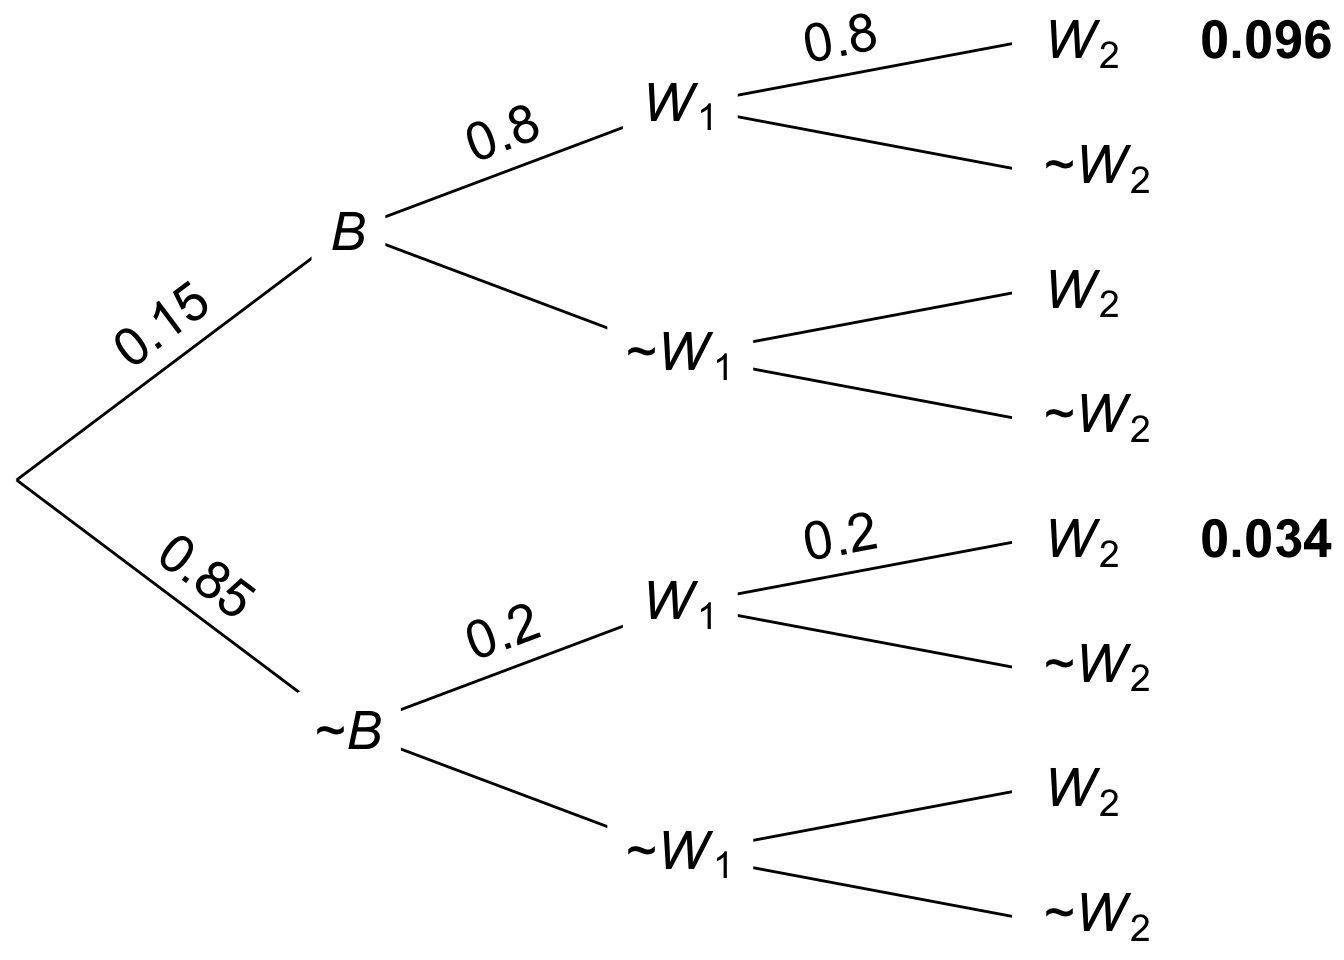 Tree diagram for the two-witness taxicab problem